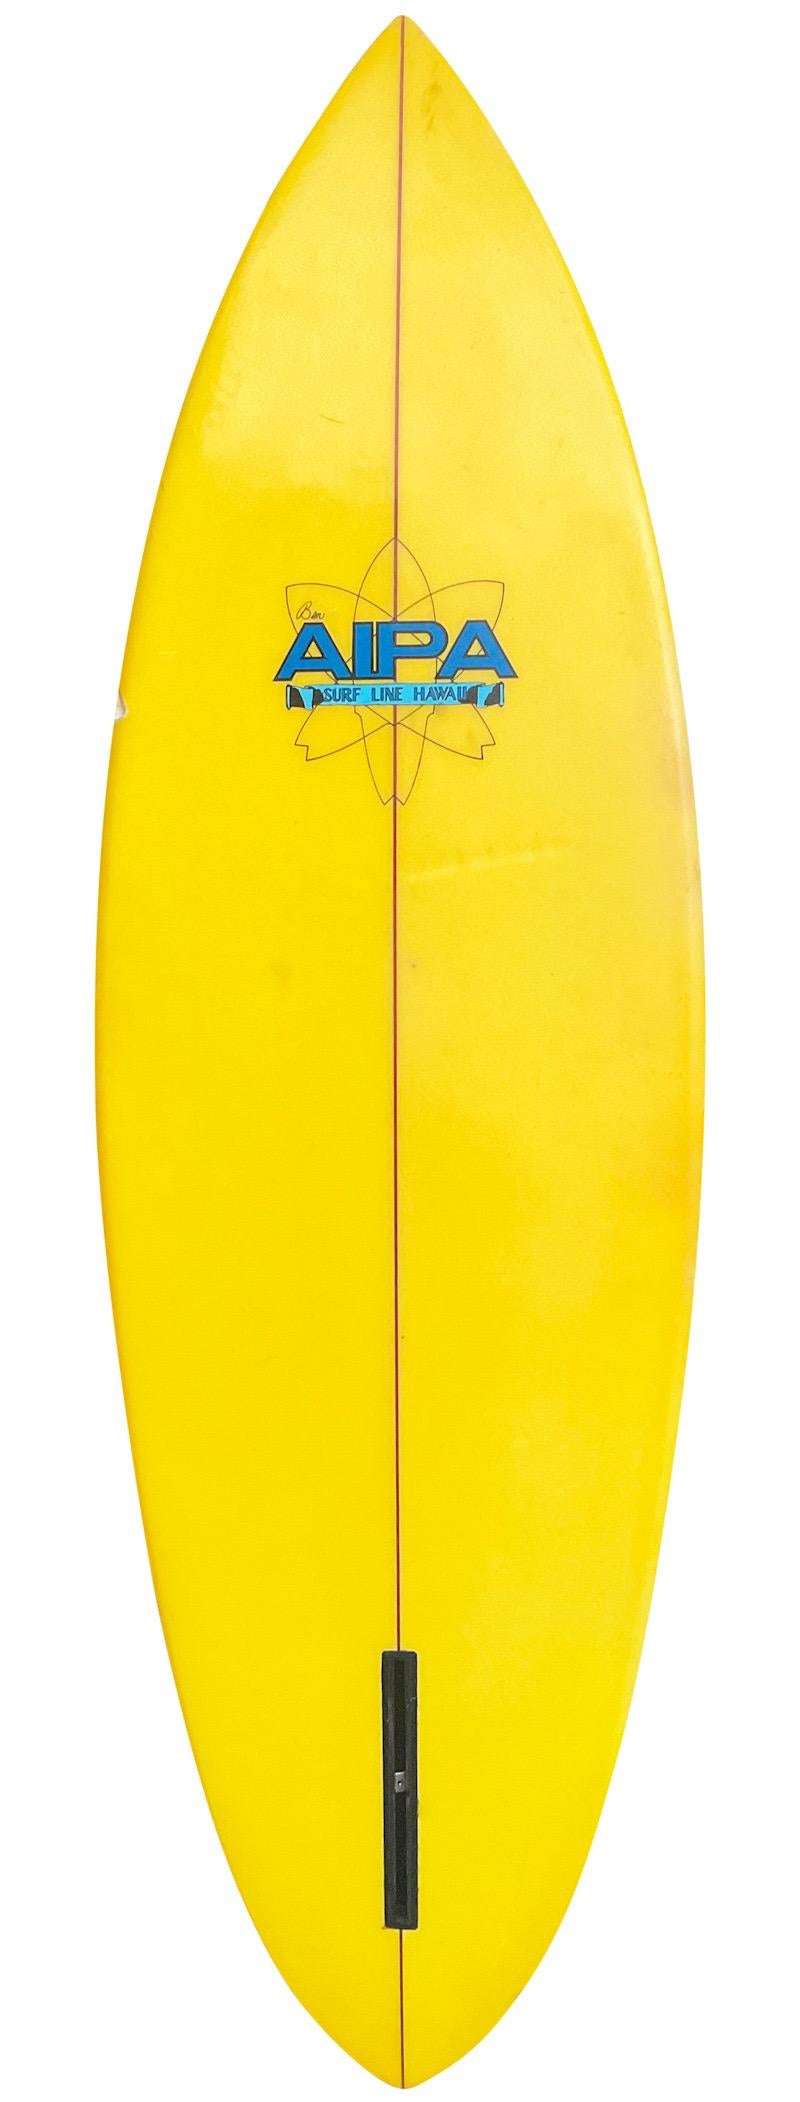 1977 vintage Surf Line Hawaii surfboard made by the late Ben Aipa (1942-2021). Features a gorgeous yellow tinted bottom/wrap around rails with double pin line design and single fin box setup. A remarkably well cared for example of a rare 1970s Surf